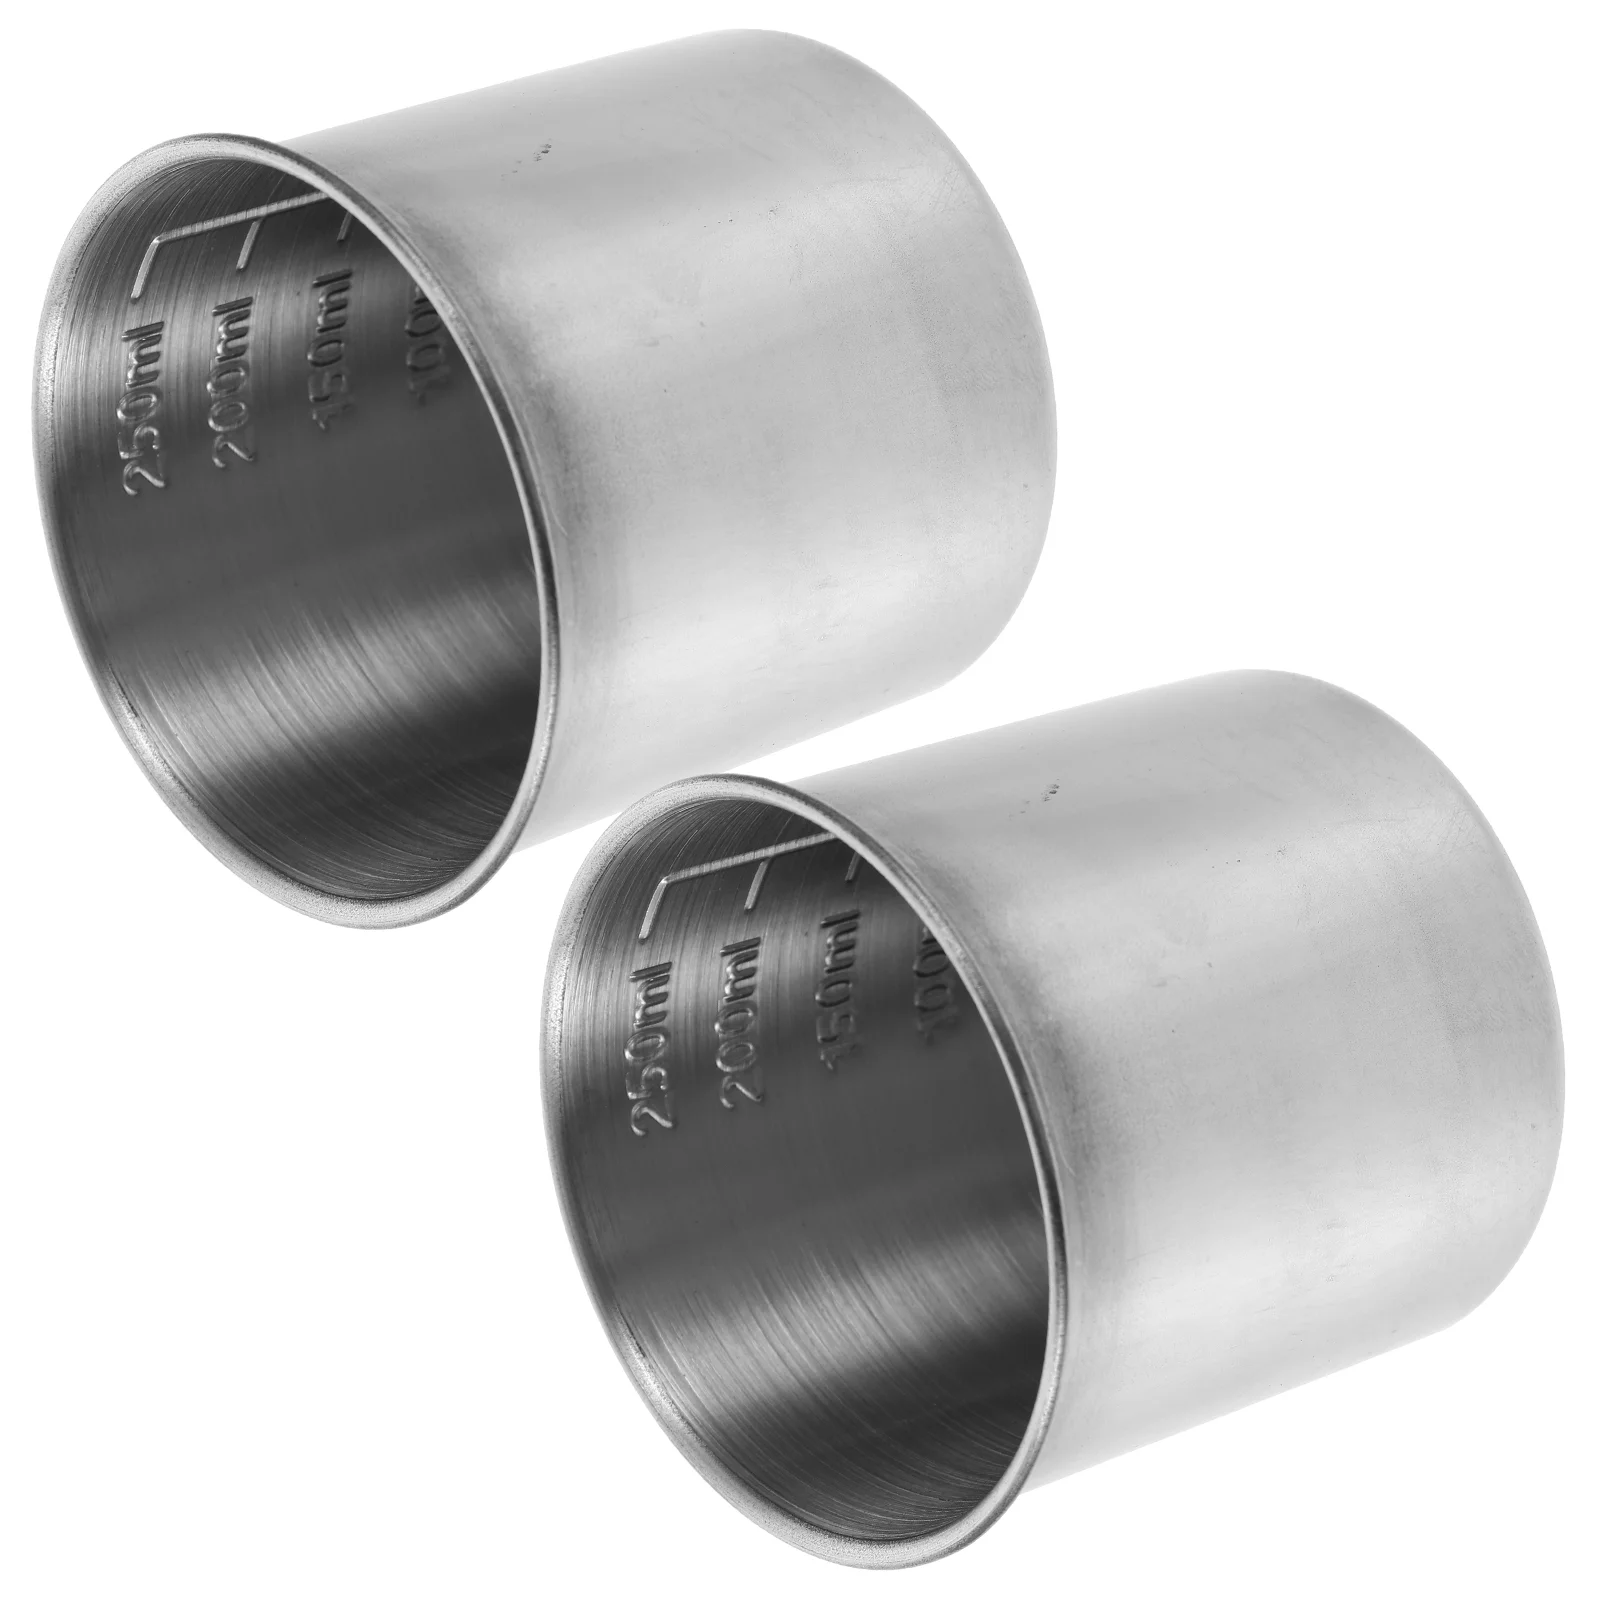 

2 Pcs Stainless Measuring Cups Food-friendly Kitchen Container Steel Drinking Rice Holder